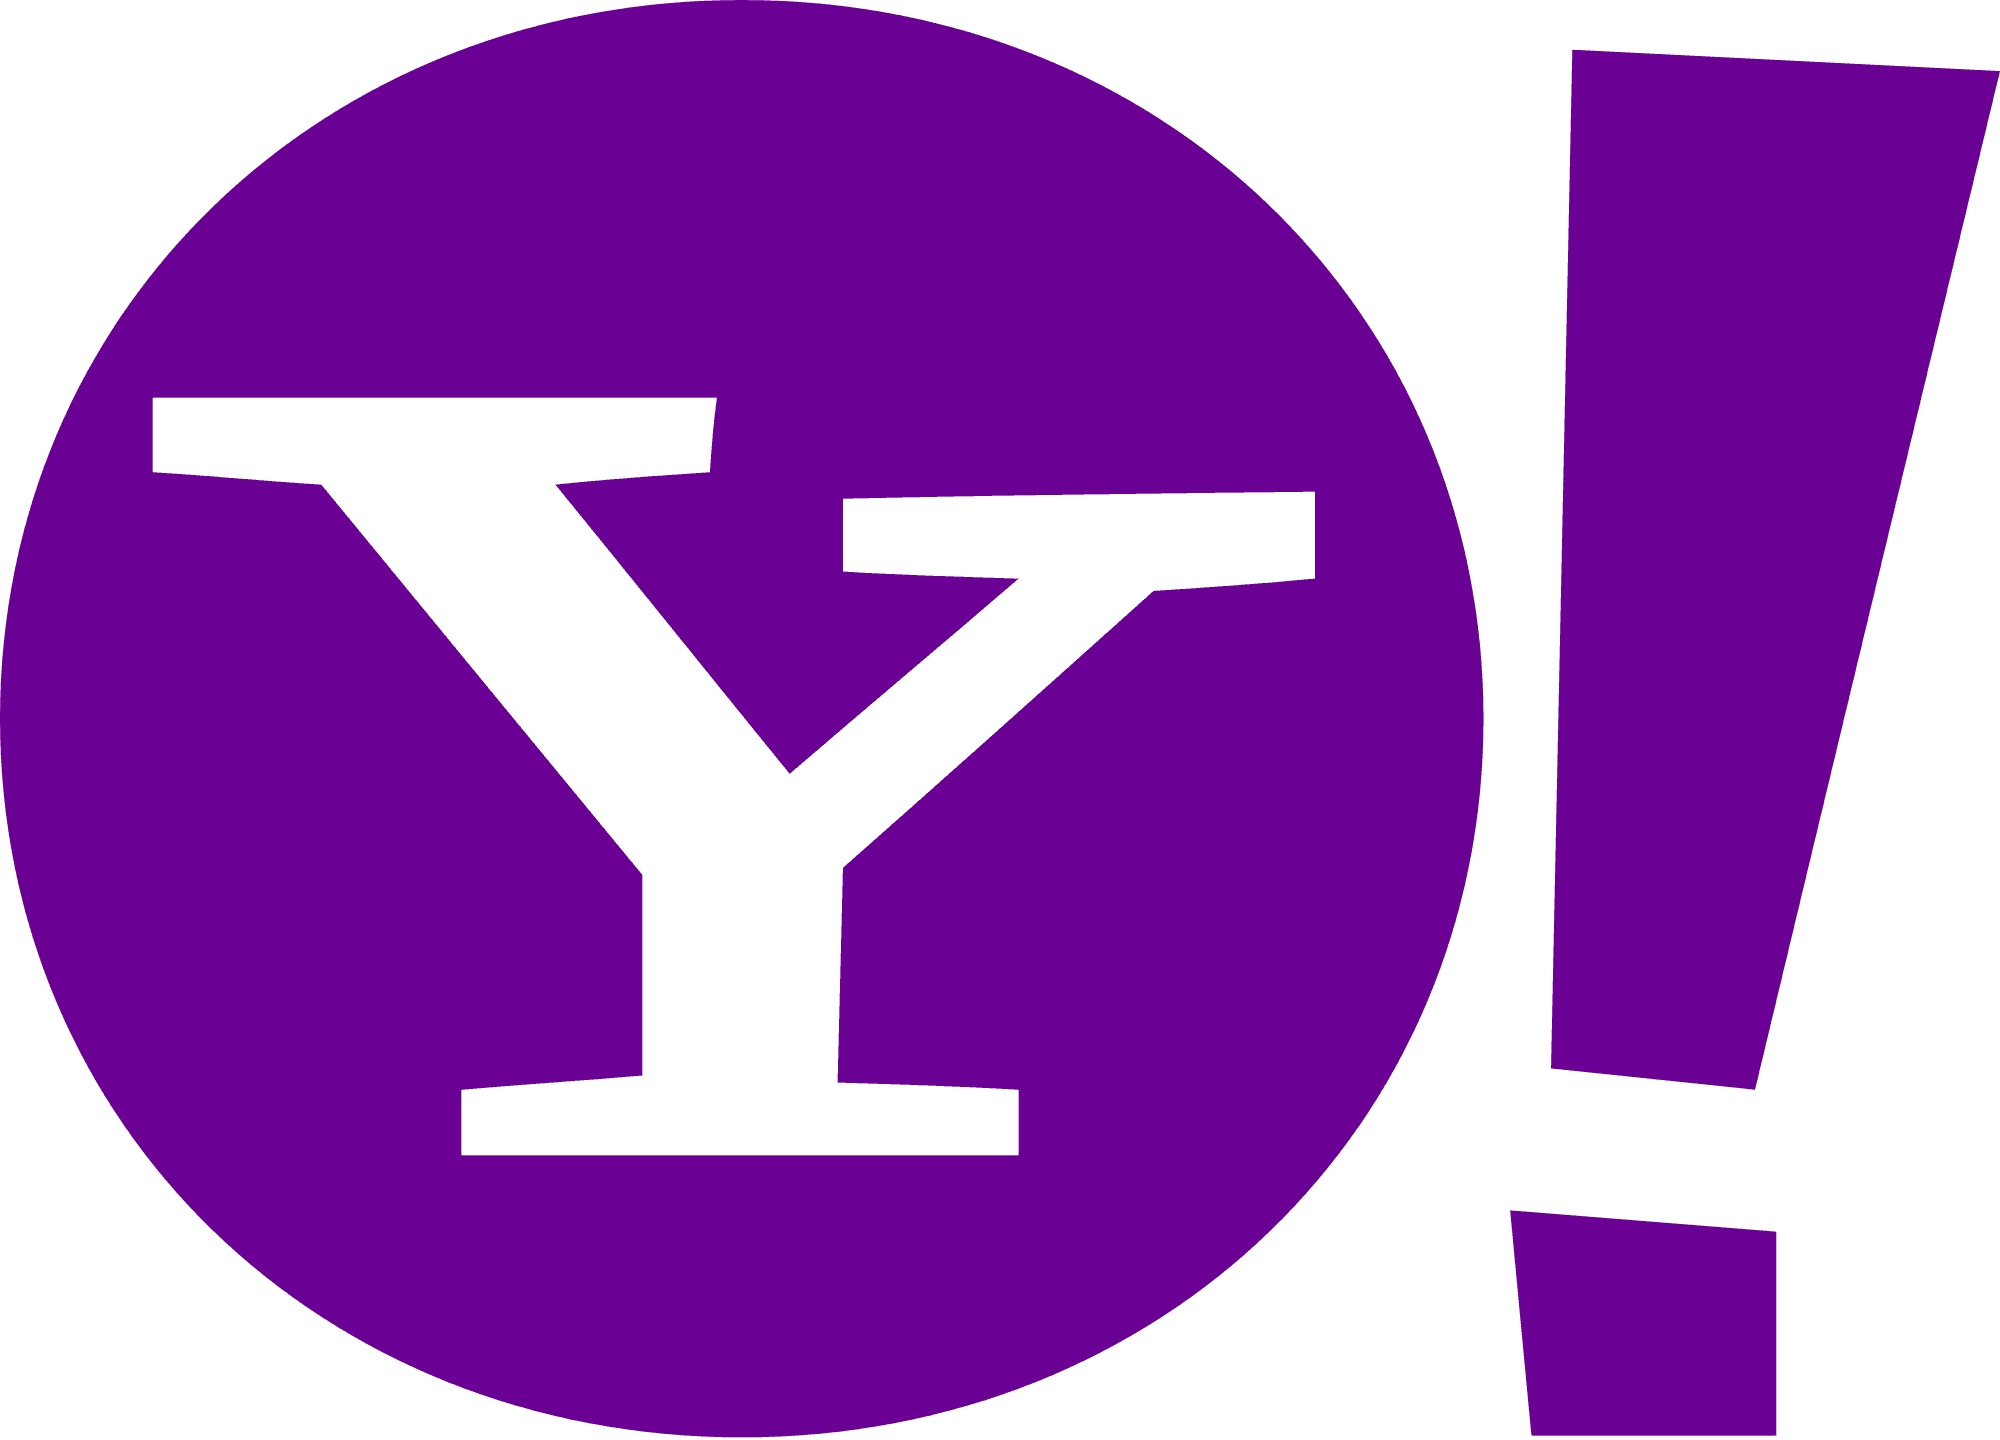 The featured image shows the logo of Yahoo Inc. The post is about the recent judgment of the Delhi High Court in a trademark infringement suit between Yahoo and an Indian Firm. To know more, please click here.